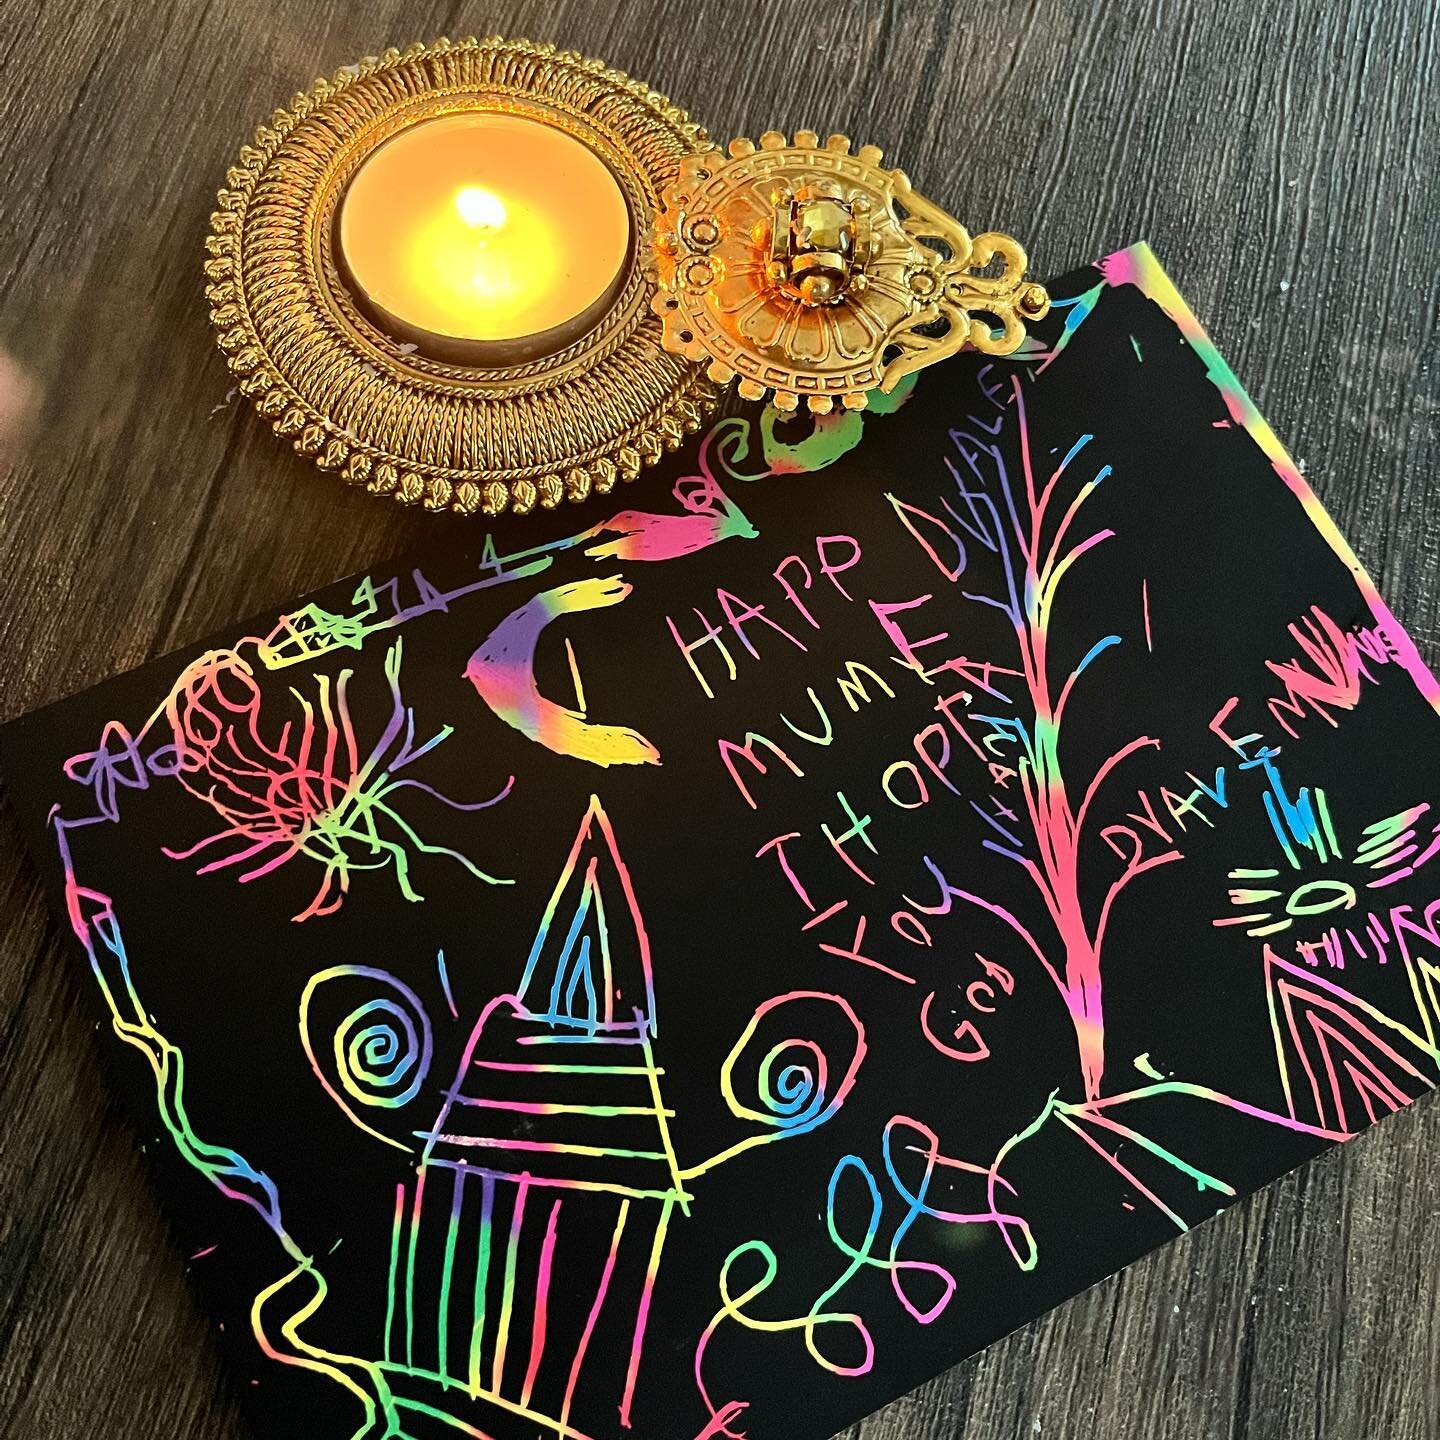 Light and love! Wish you all a very happy Diwali and a new year full of HOPE - I hope this new year is filled with learnings and experiments, new experiences and meaningful connections. 

Growing up, I remember being dragged to millions of my relativ